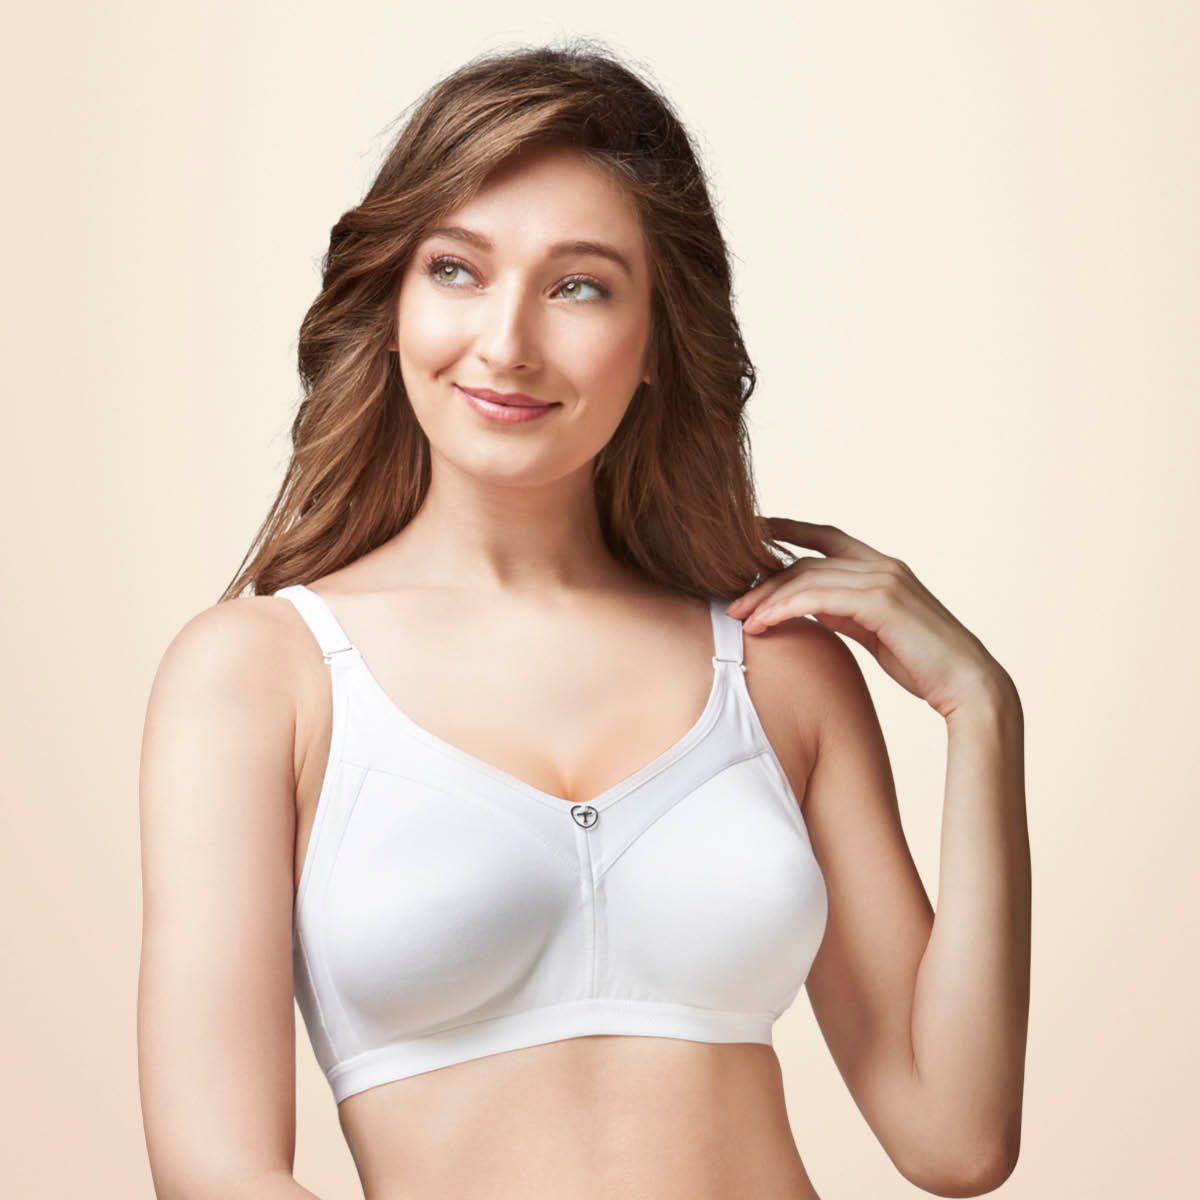 Trylo Rozi Bra Price Starting From Rs 315. Find Verified Sellers